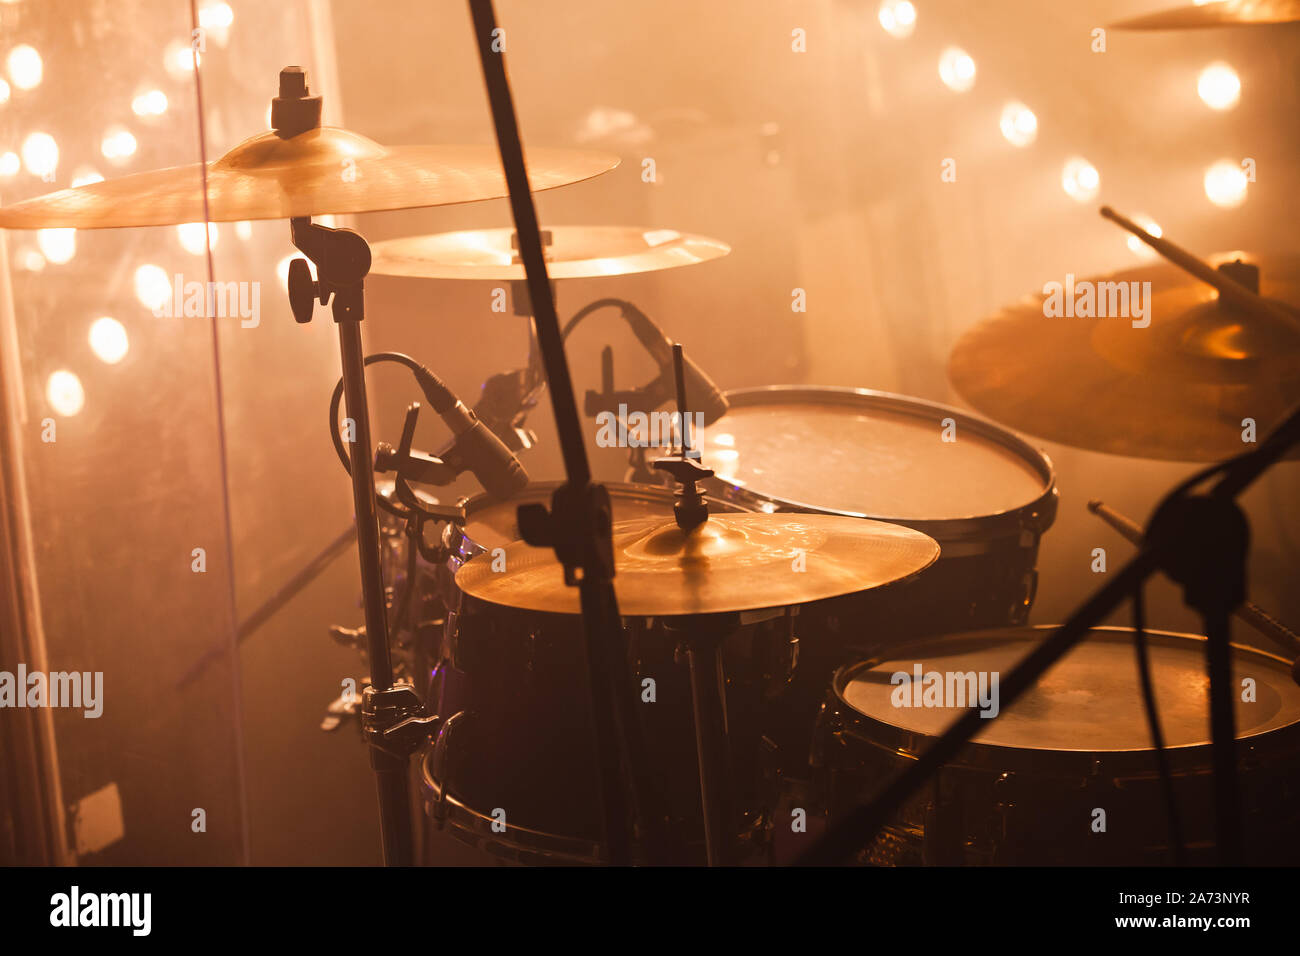 Rock band drum set with cymbals stands on a stage with strobe lights Stock Photo